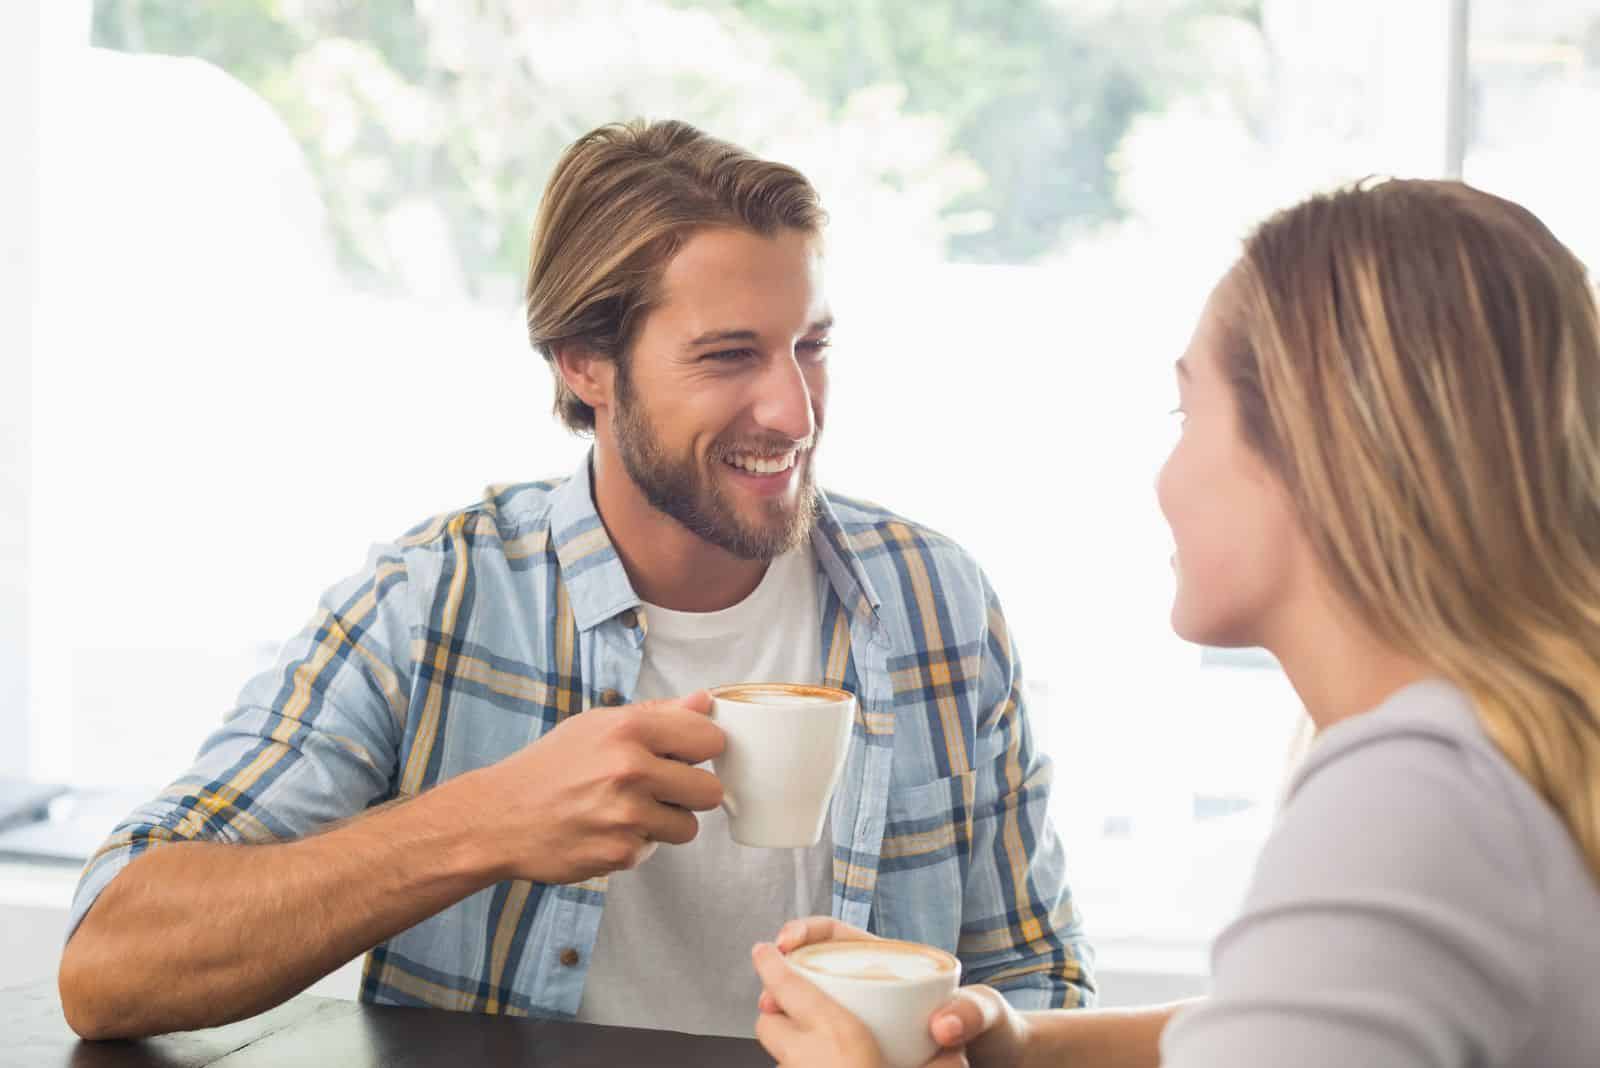 a smiling man is talking to a woman